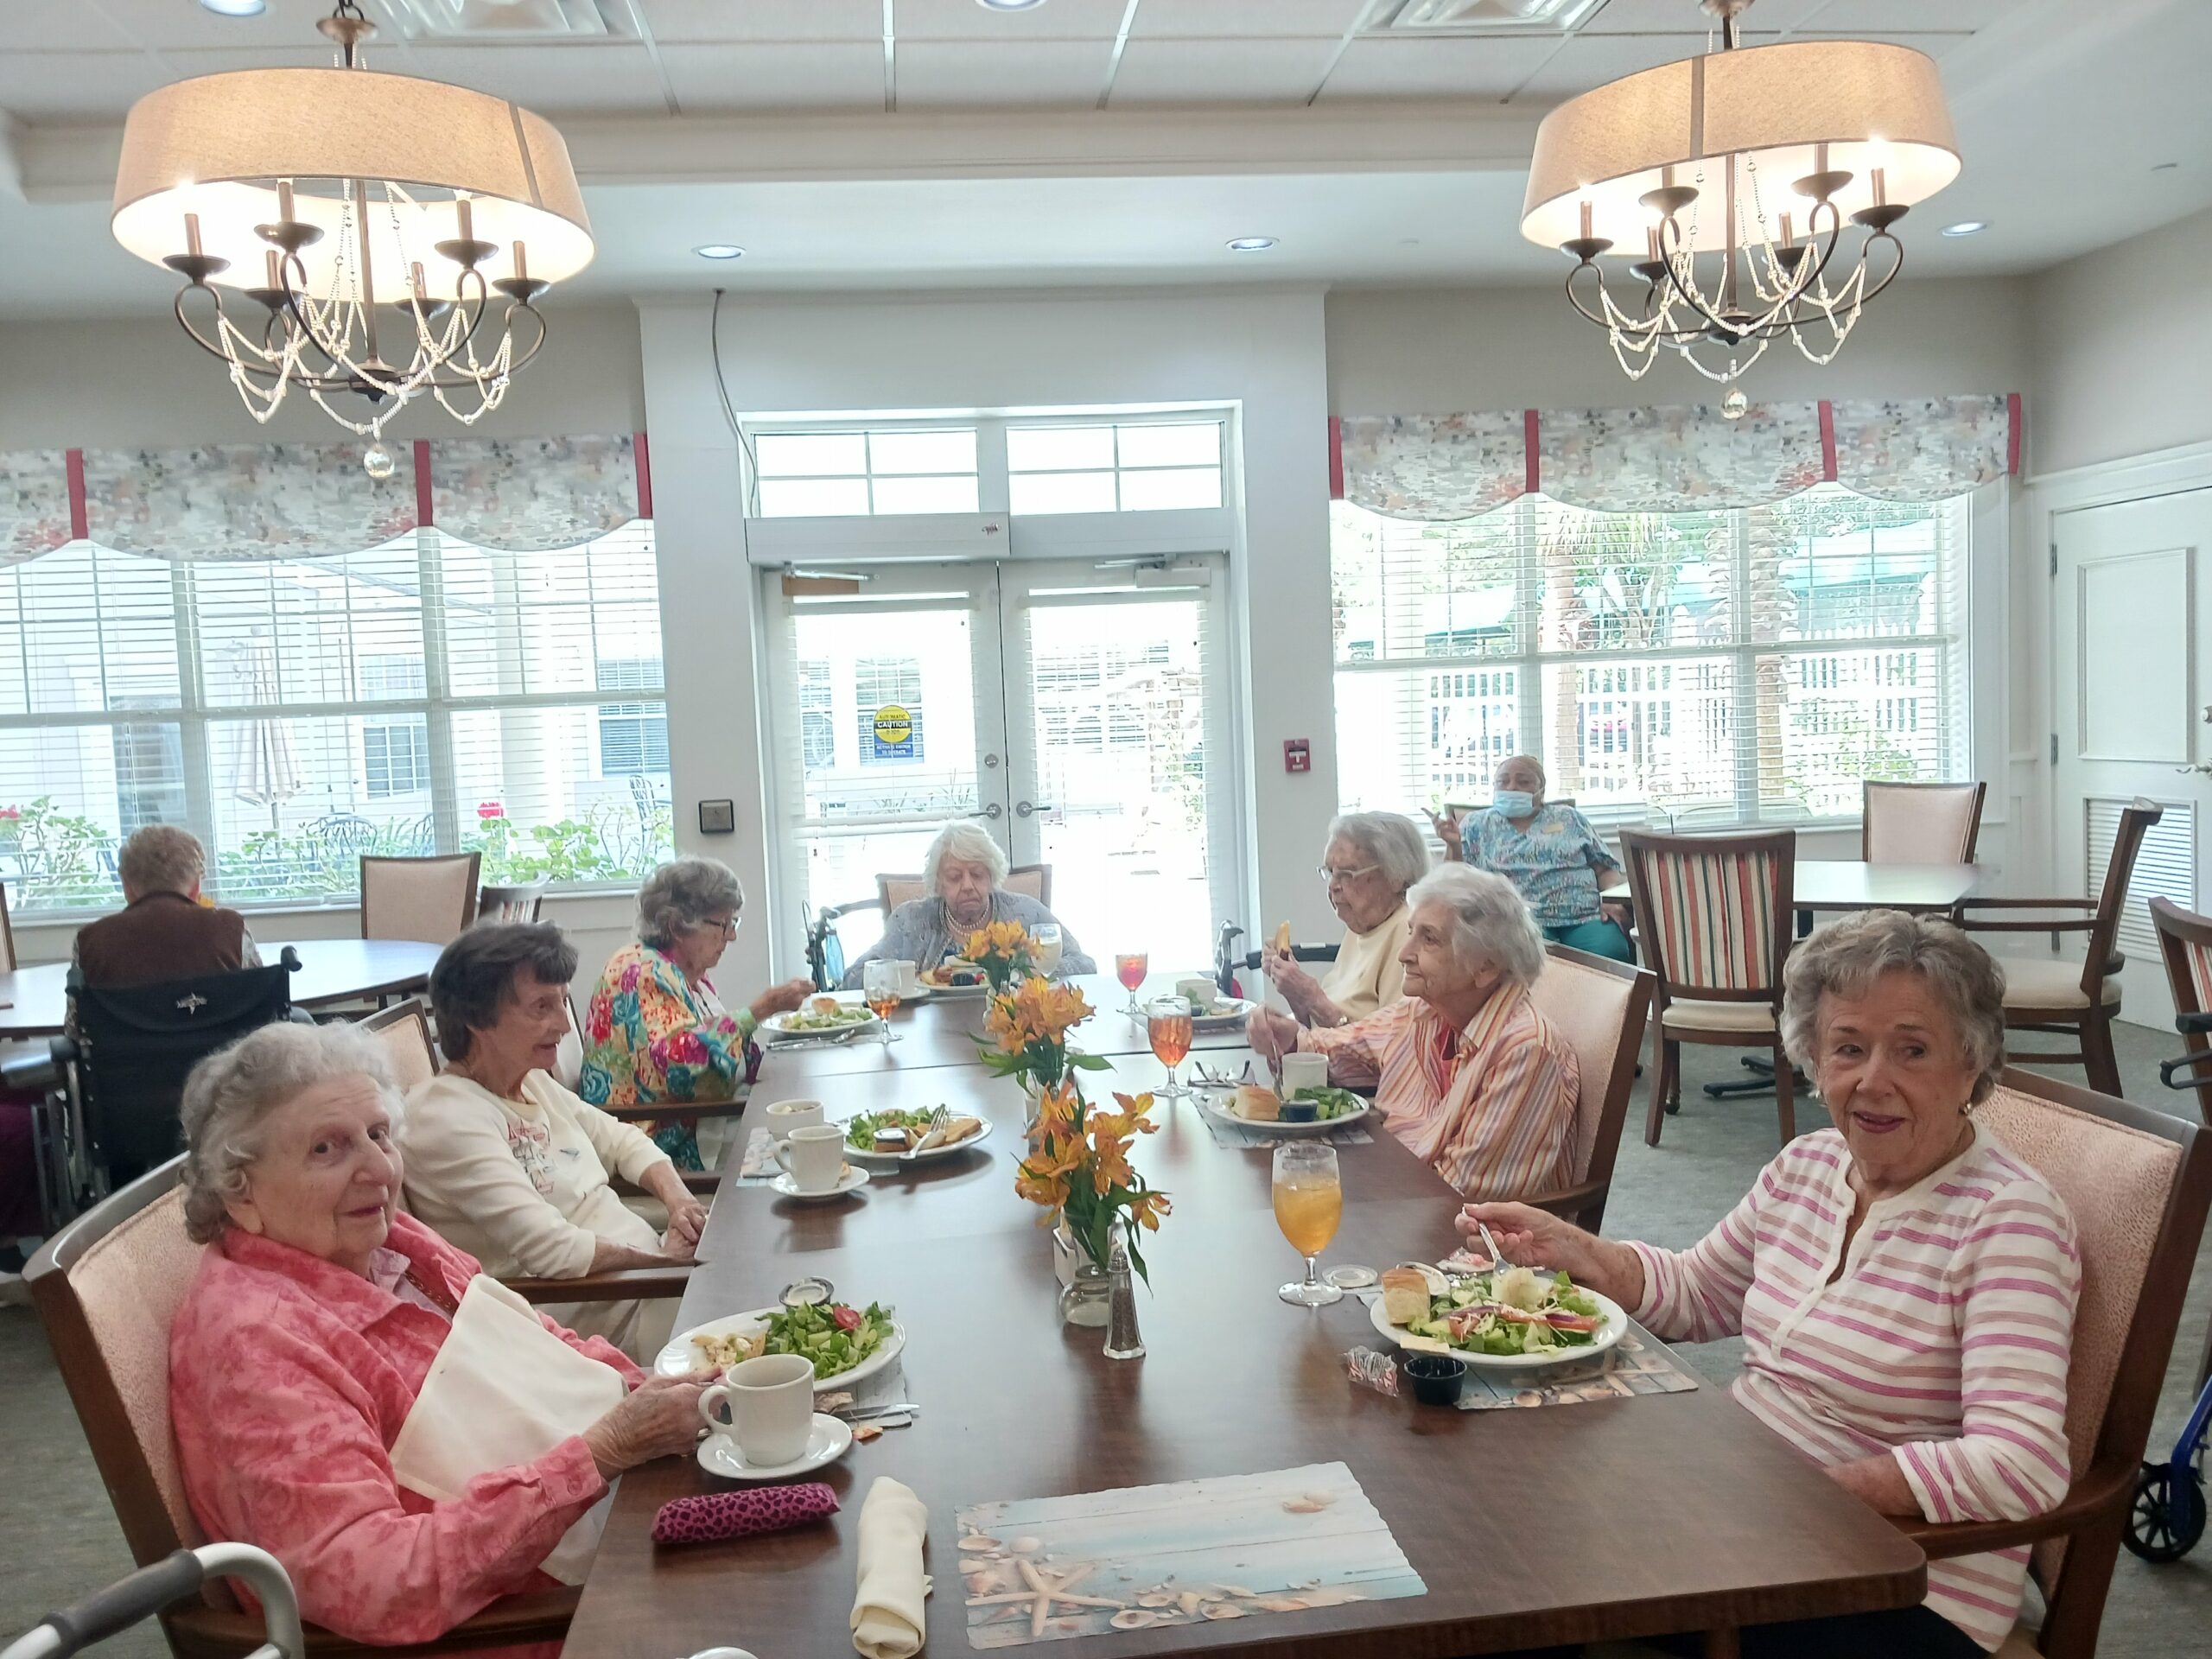 A group of elderly women sitting at a table.